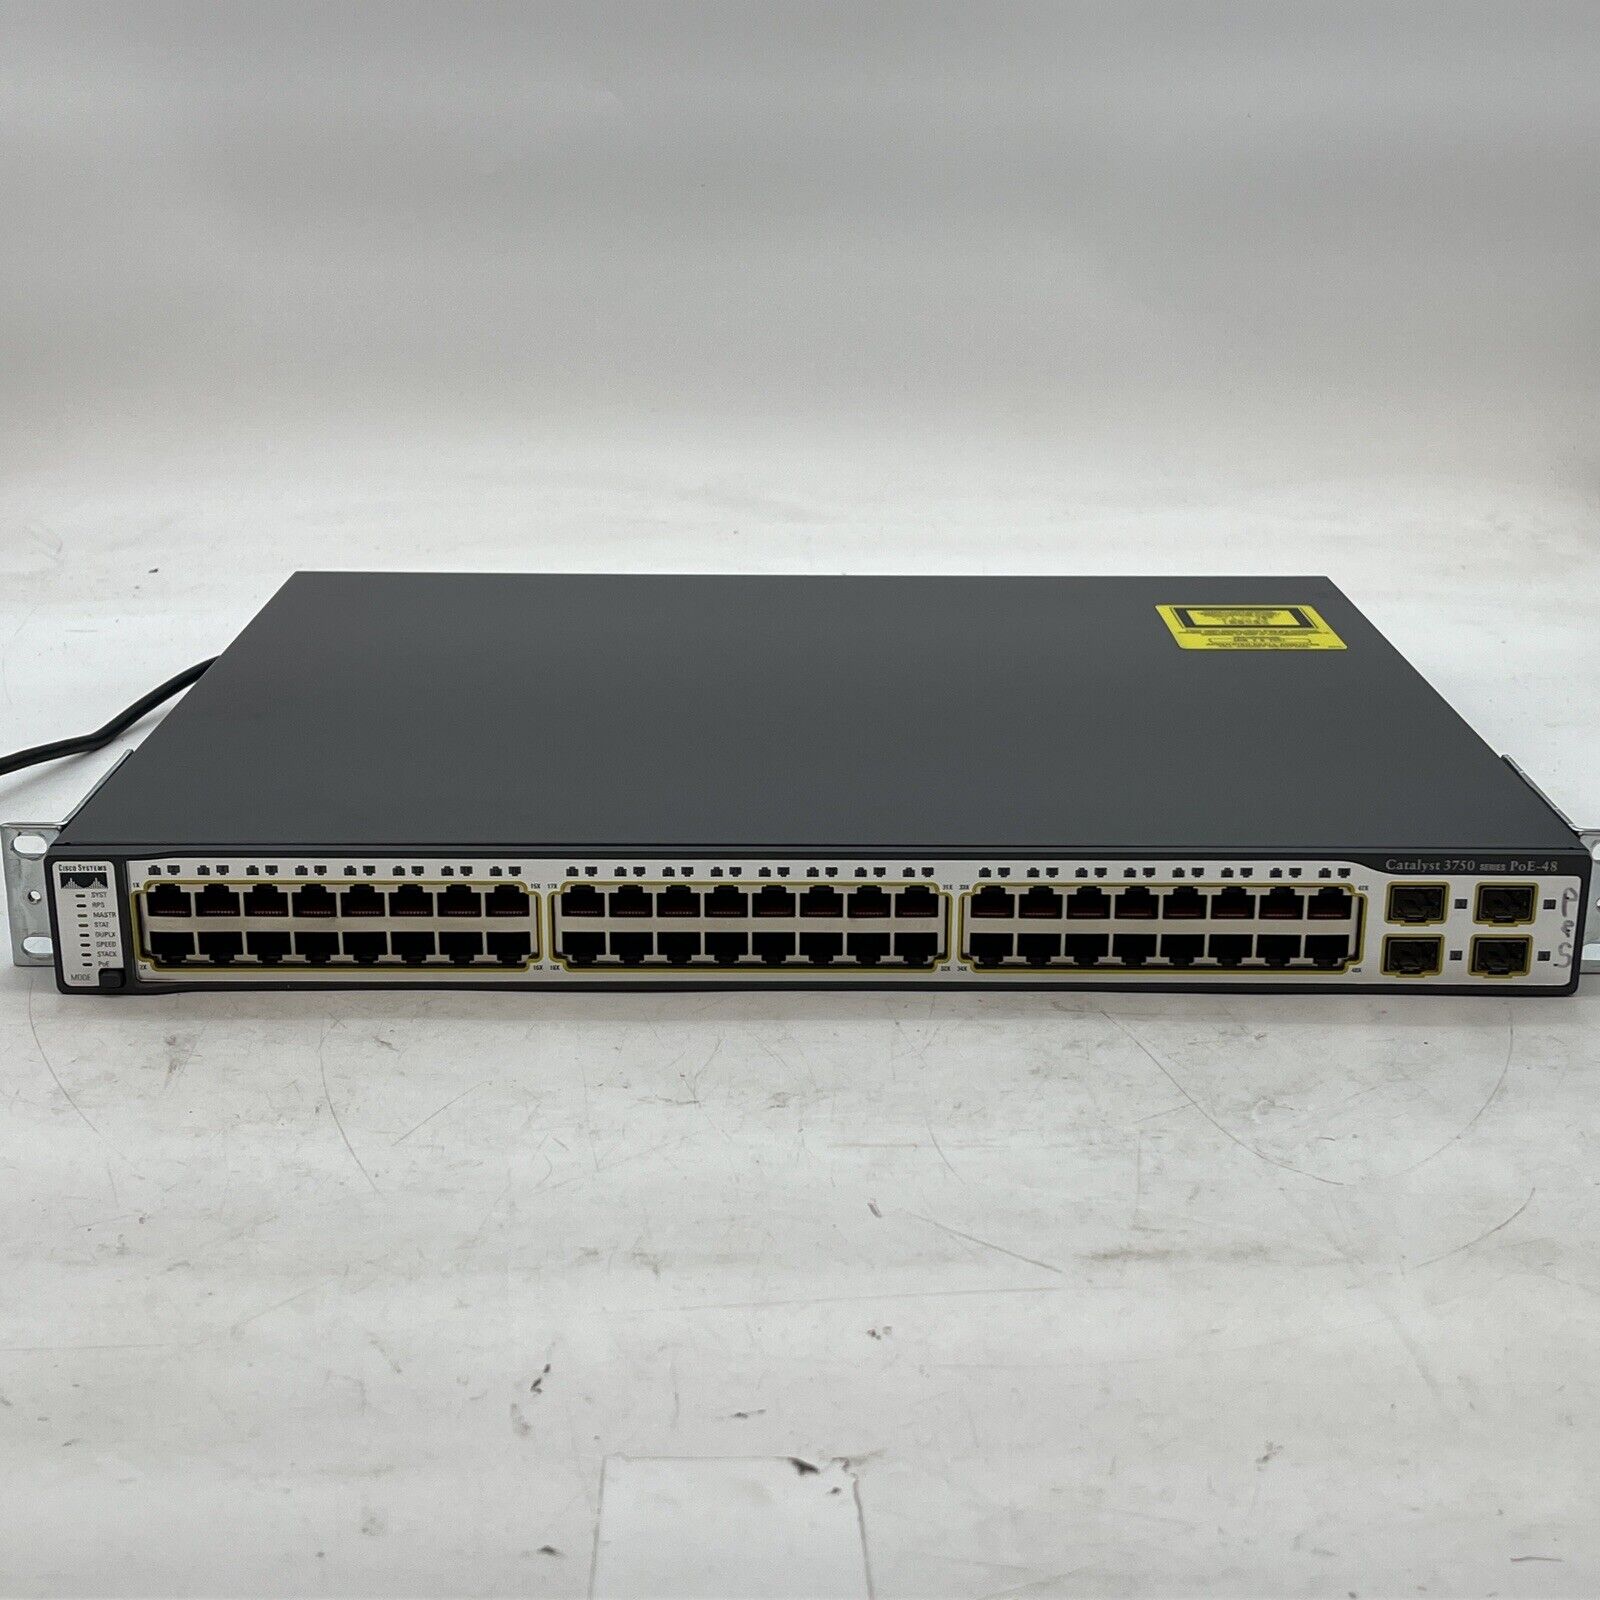 Cisco 3750 WS-C3750-48PS-S 48-Port PoE Managed Ethernet Network Switch 2 Stack